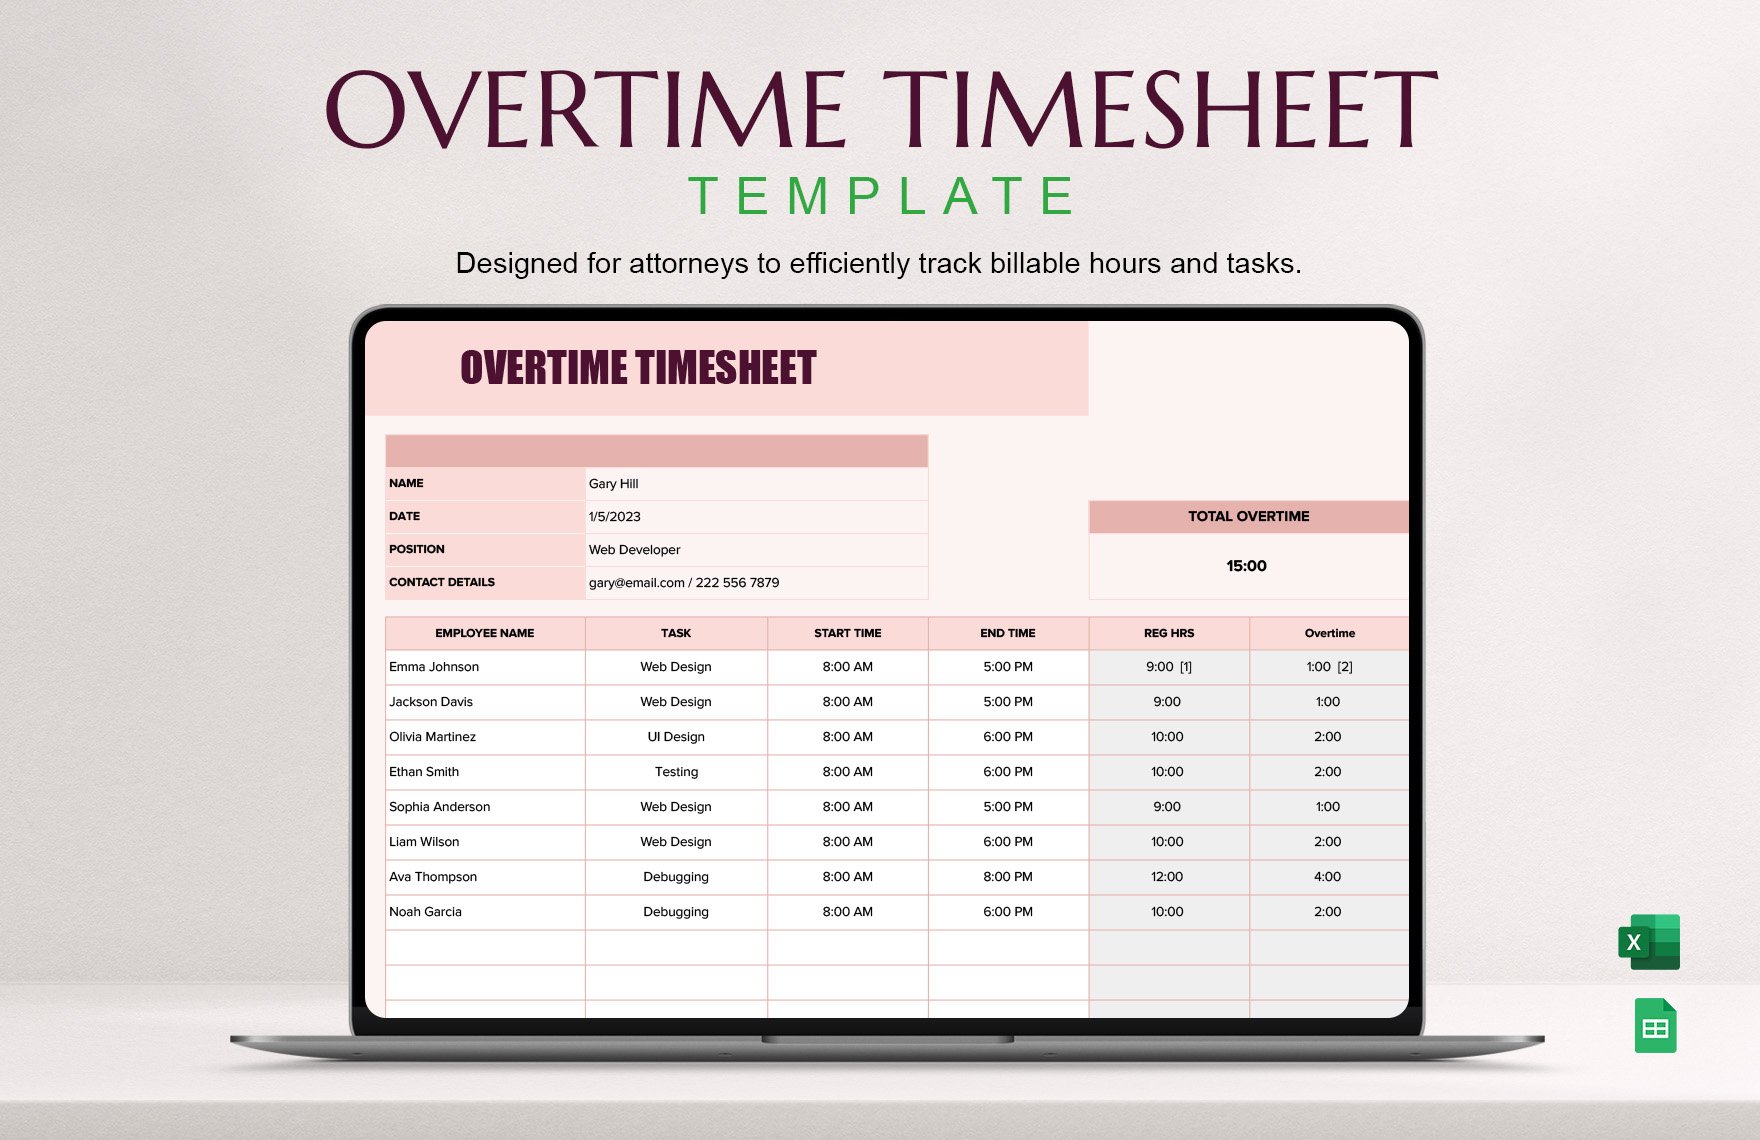 Free Overtime Timesheet Template in Excel, Google Sheets